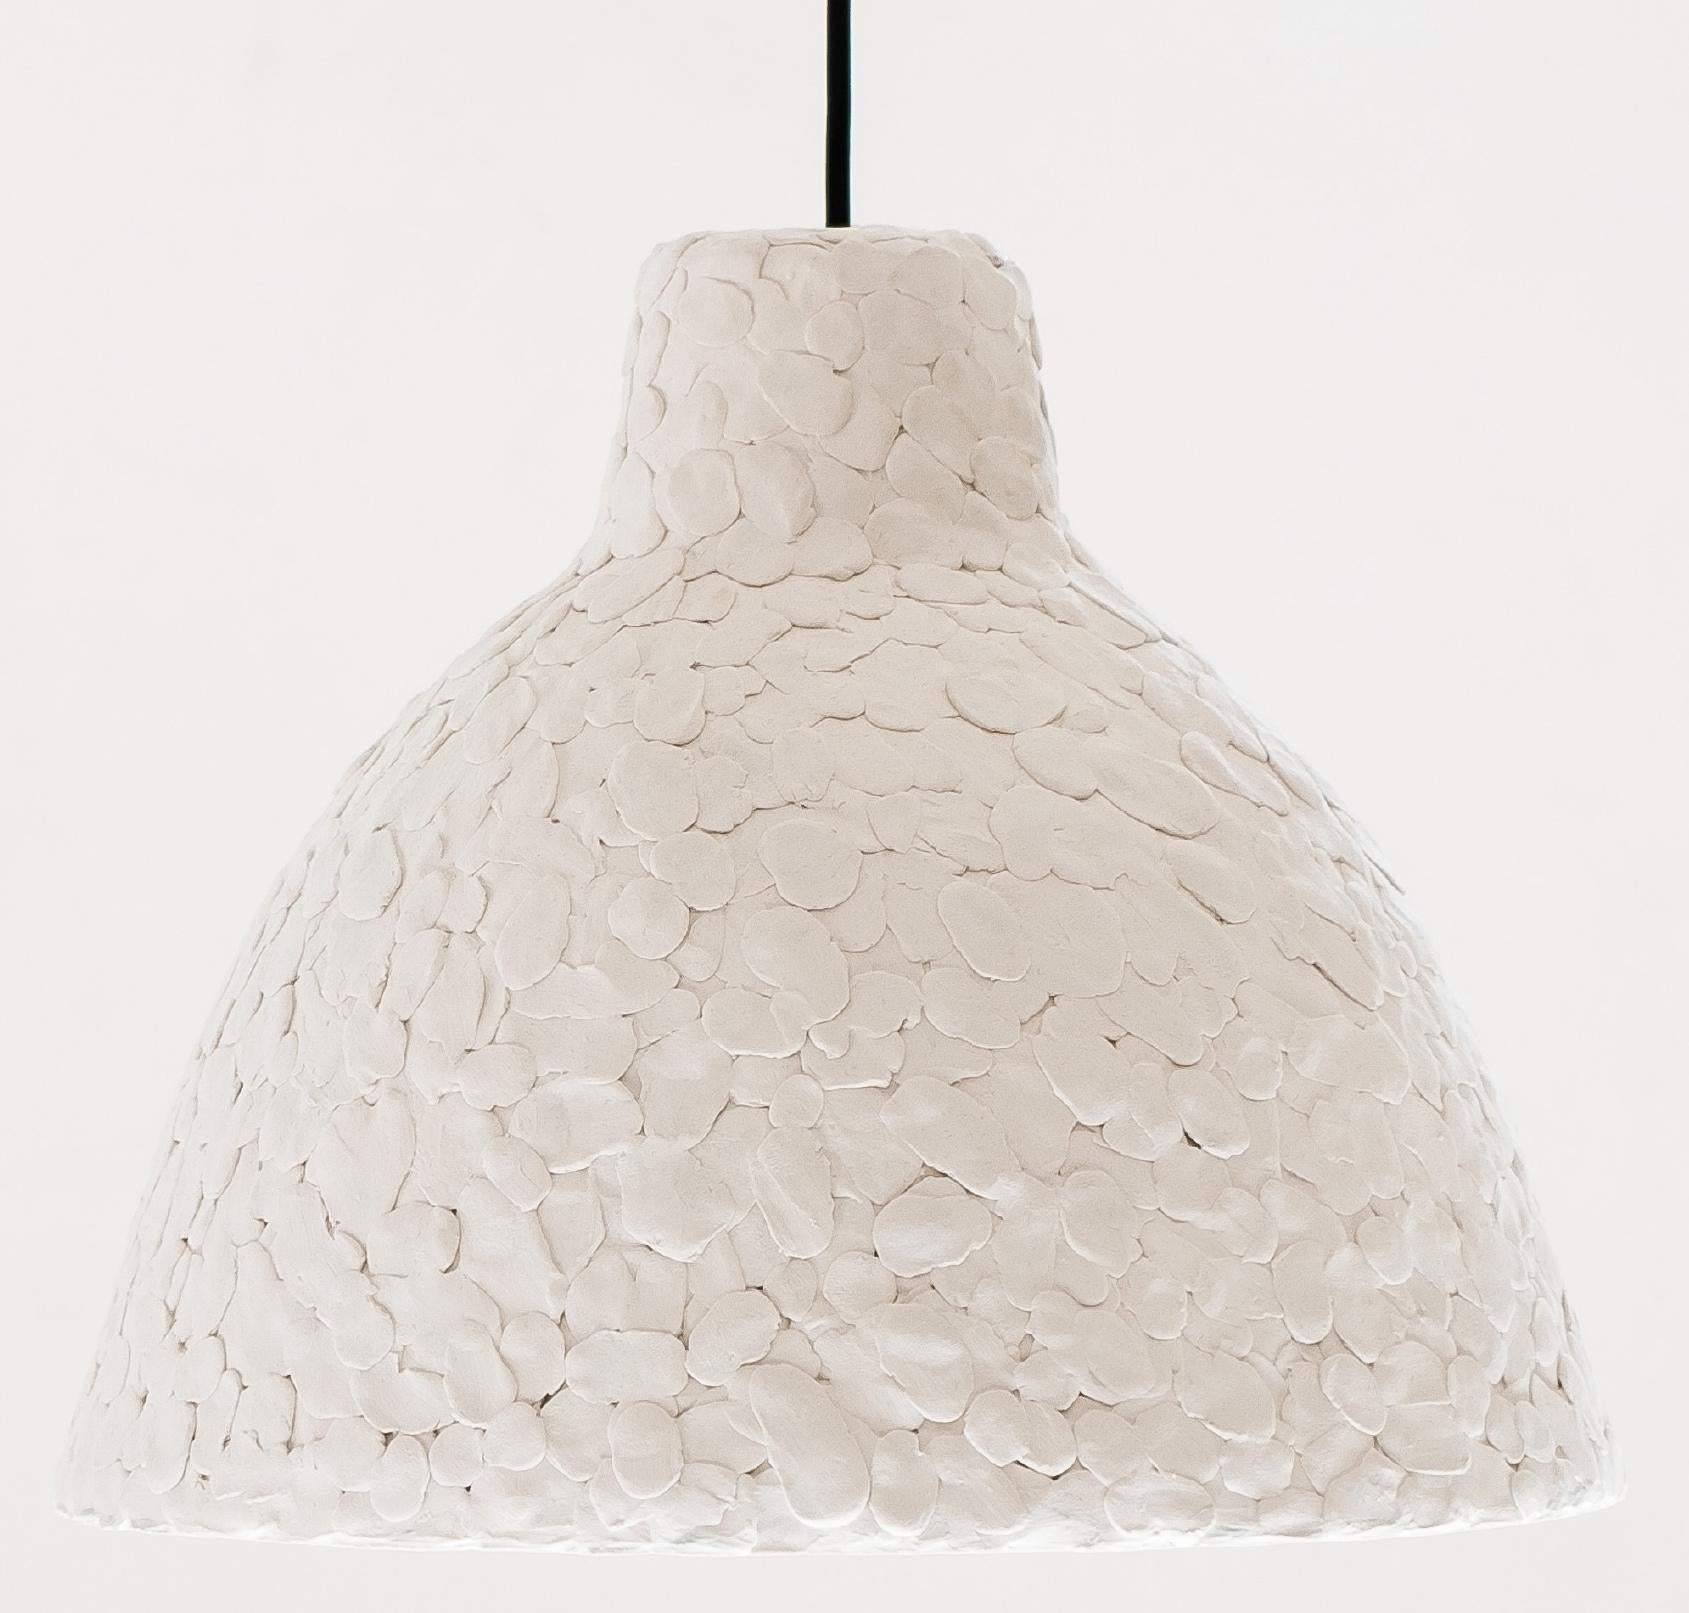 The art of chewing gum! Sculpted black pendant lamp with creamy white interior giving a pleasant light. The quintessential lamp shape with a truly personal and lively surface. 

Thin glass fiber reinforced composite plaster lamp shade, E26/E27